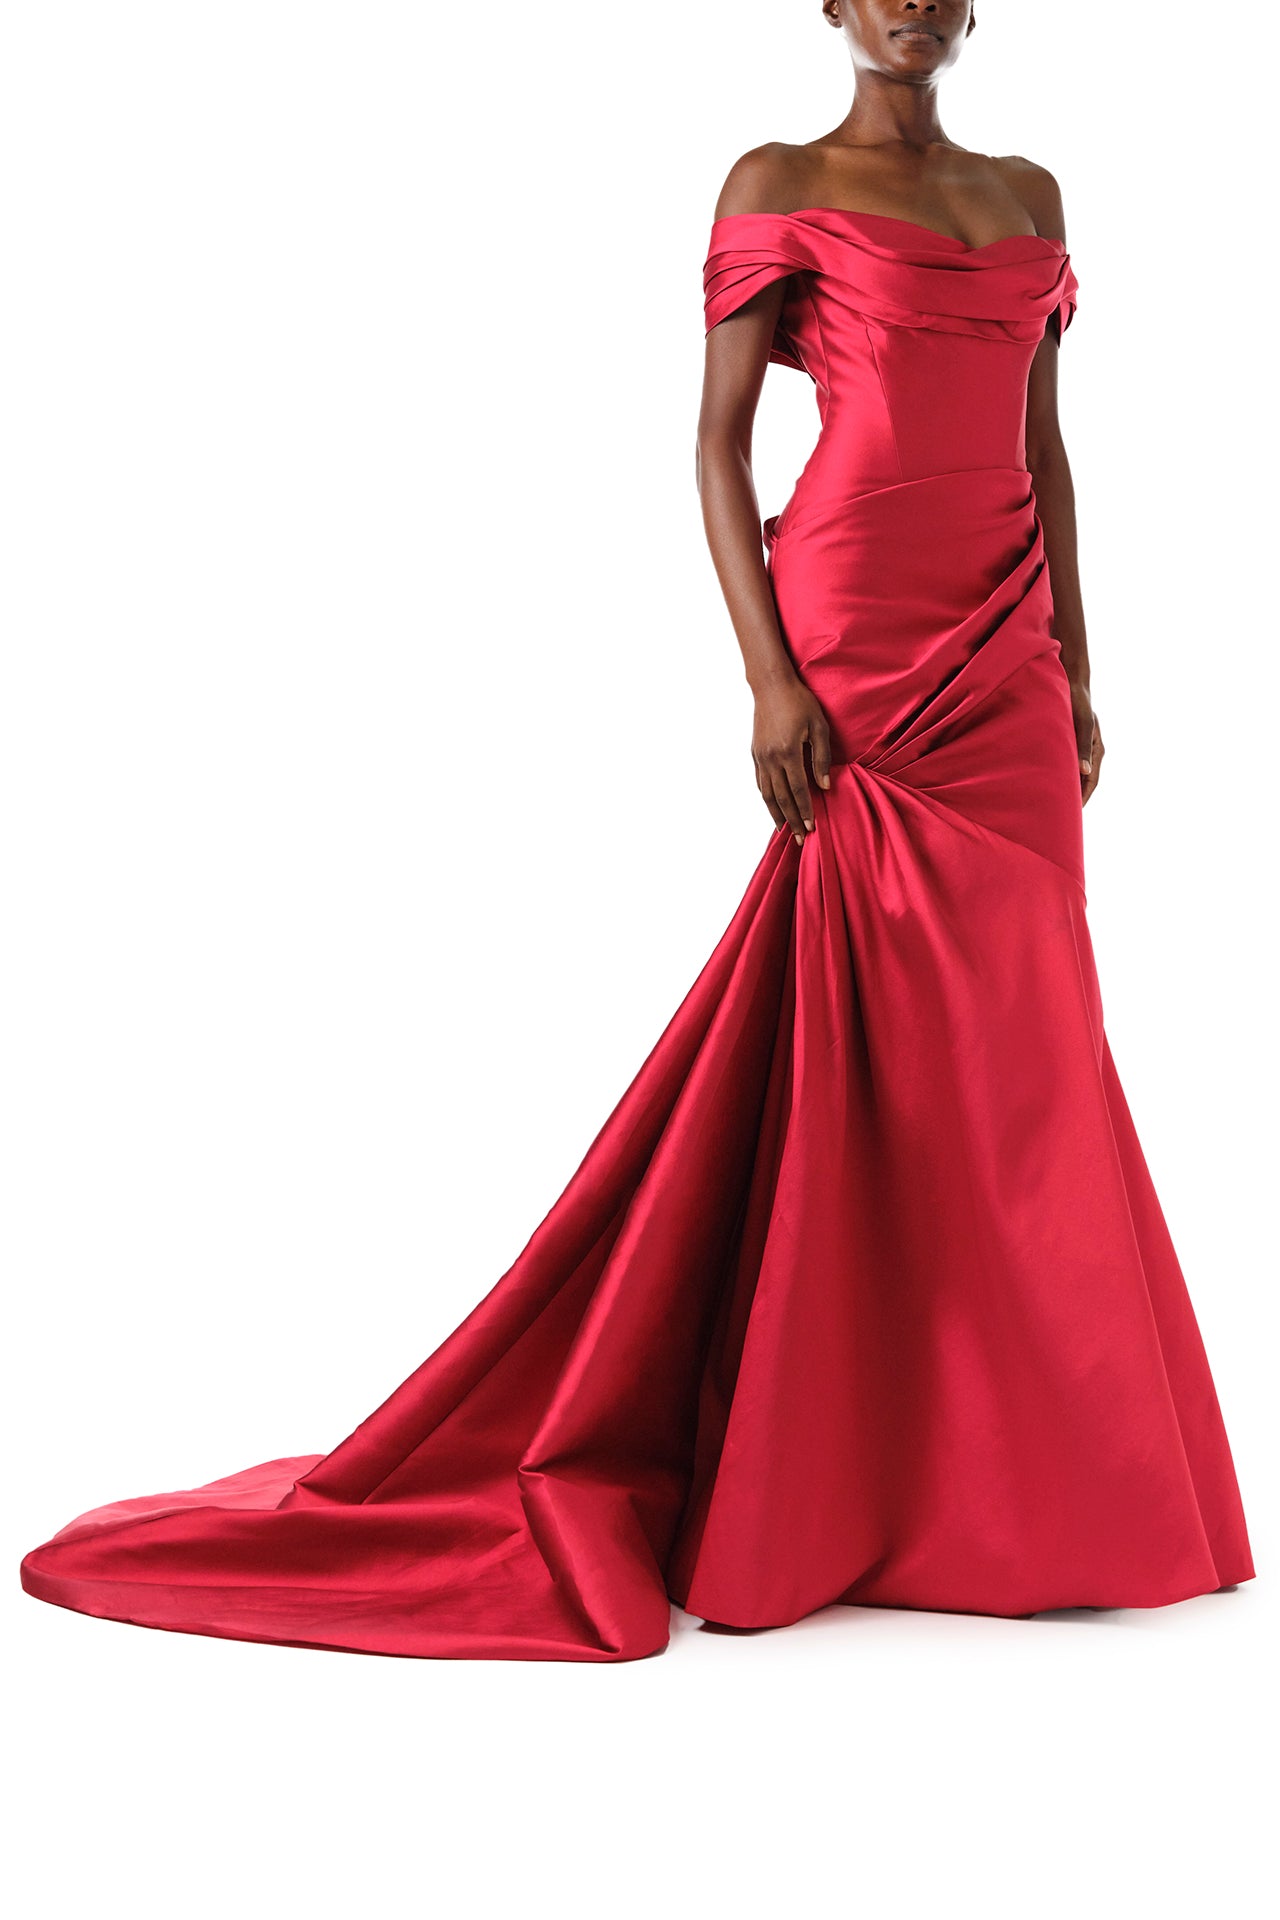 Monique Lhuillier Fall 2024 scarlet mikado, off-the-shoulder, draped gown with trumpet skirt and low back - front.